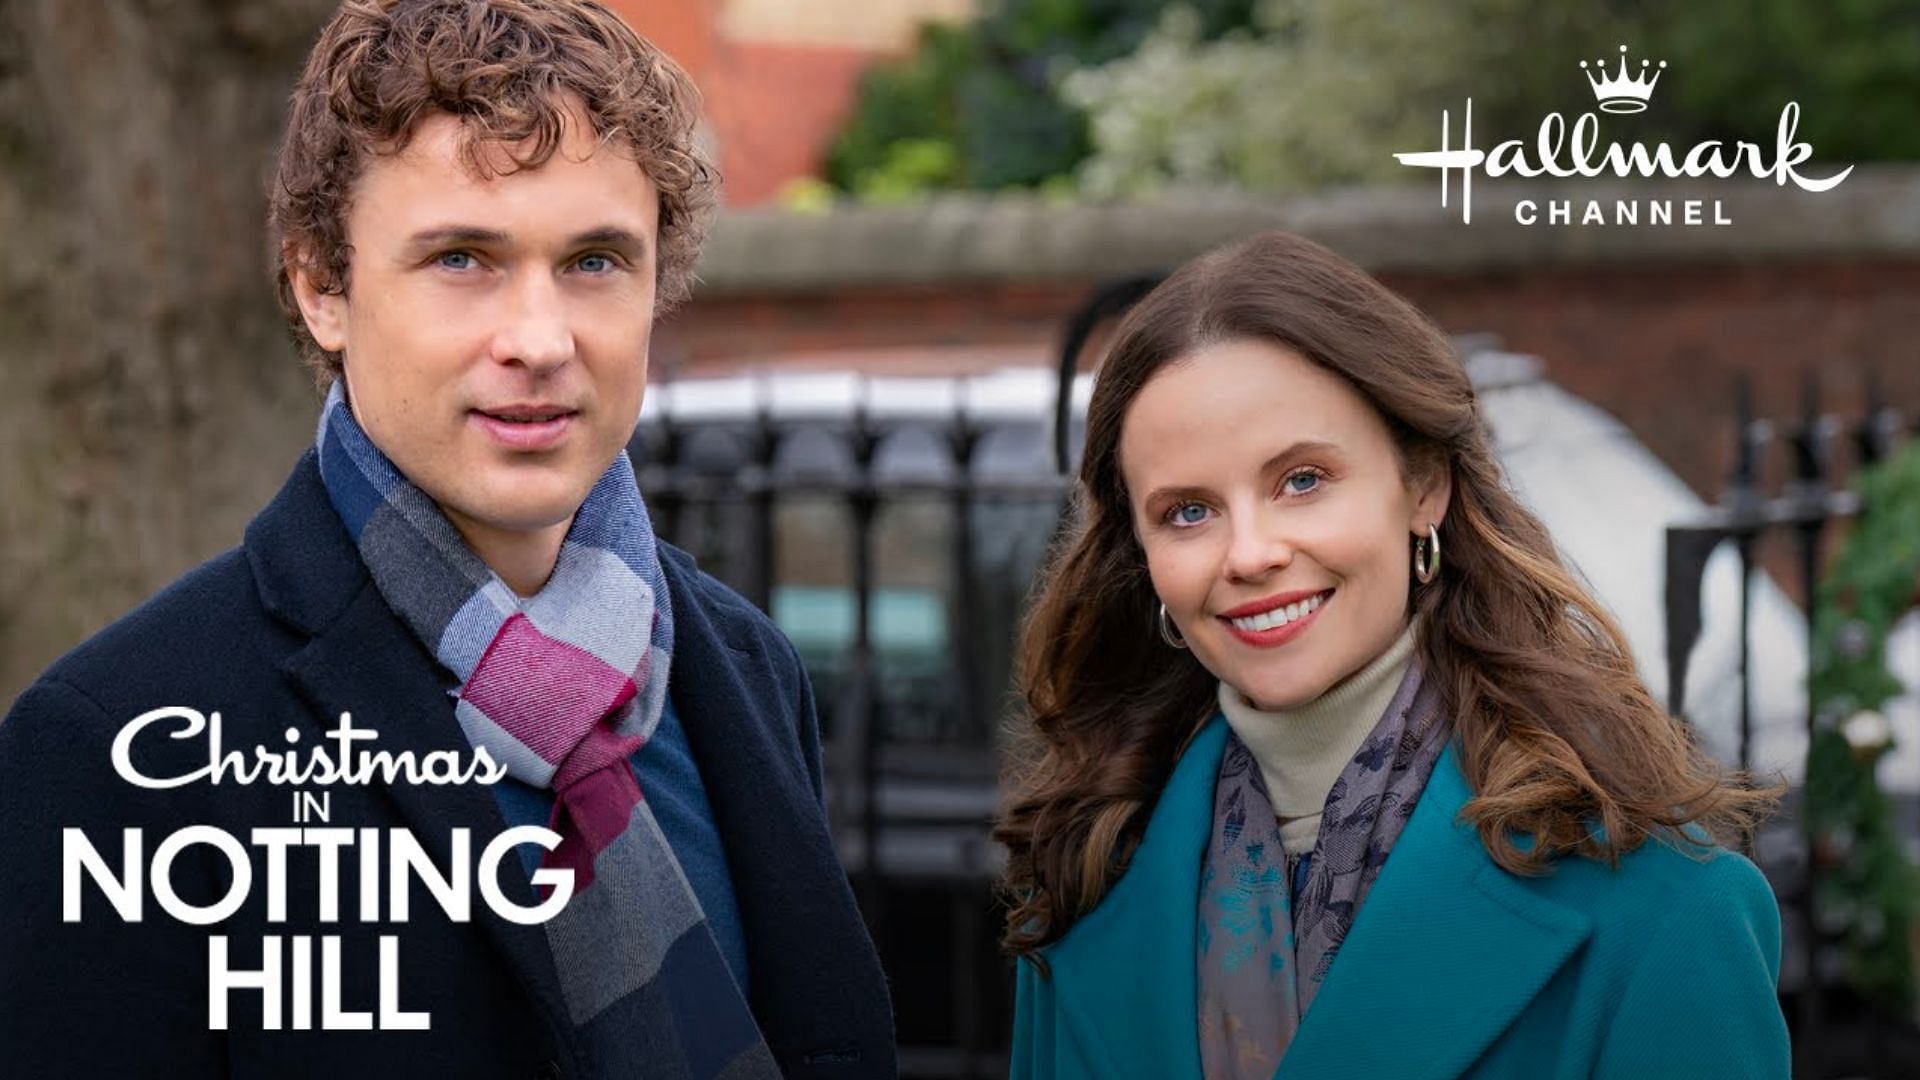 Sarah and William in Christmas in Notting Hill   (Image via Hallmark)